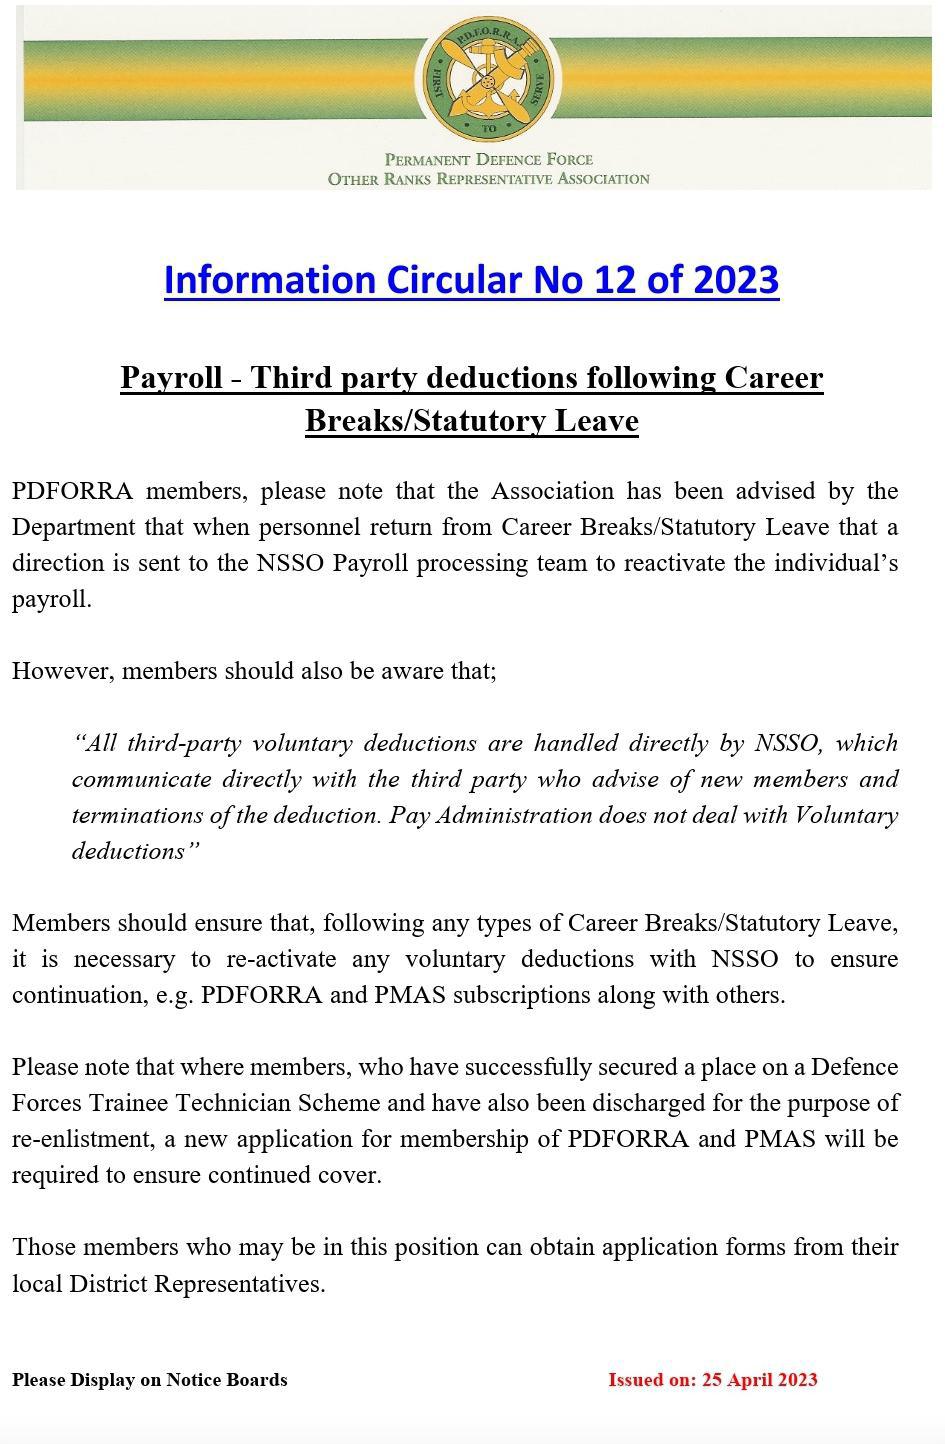 Information Circular No 12 of 2023 - Third Party Deductions following Career Breaks